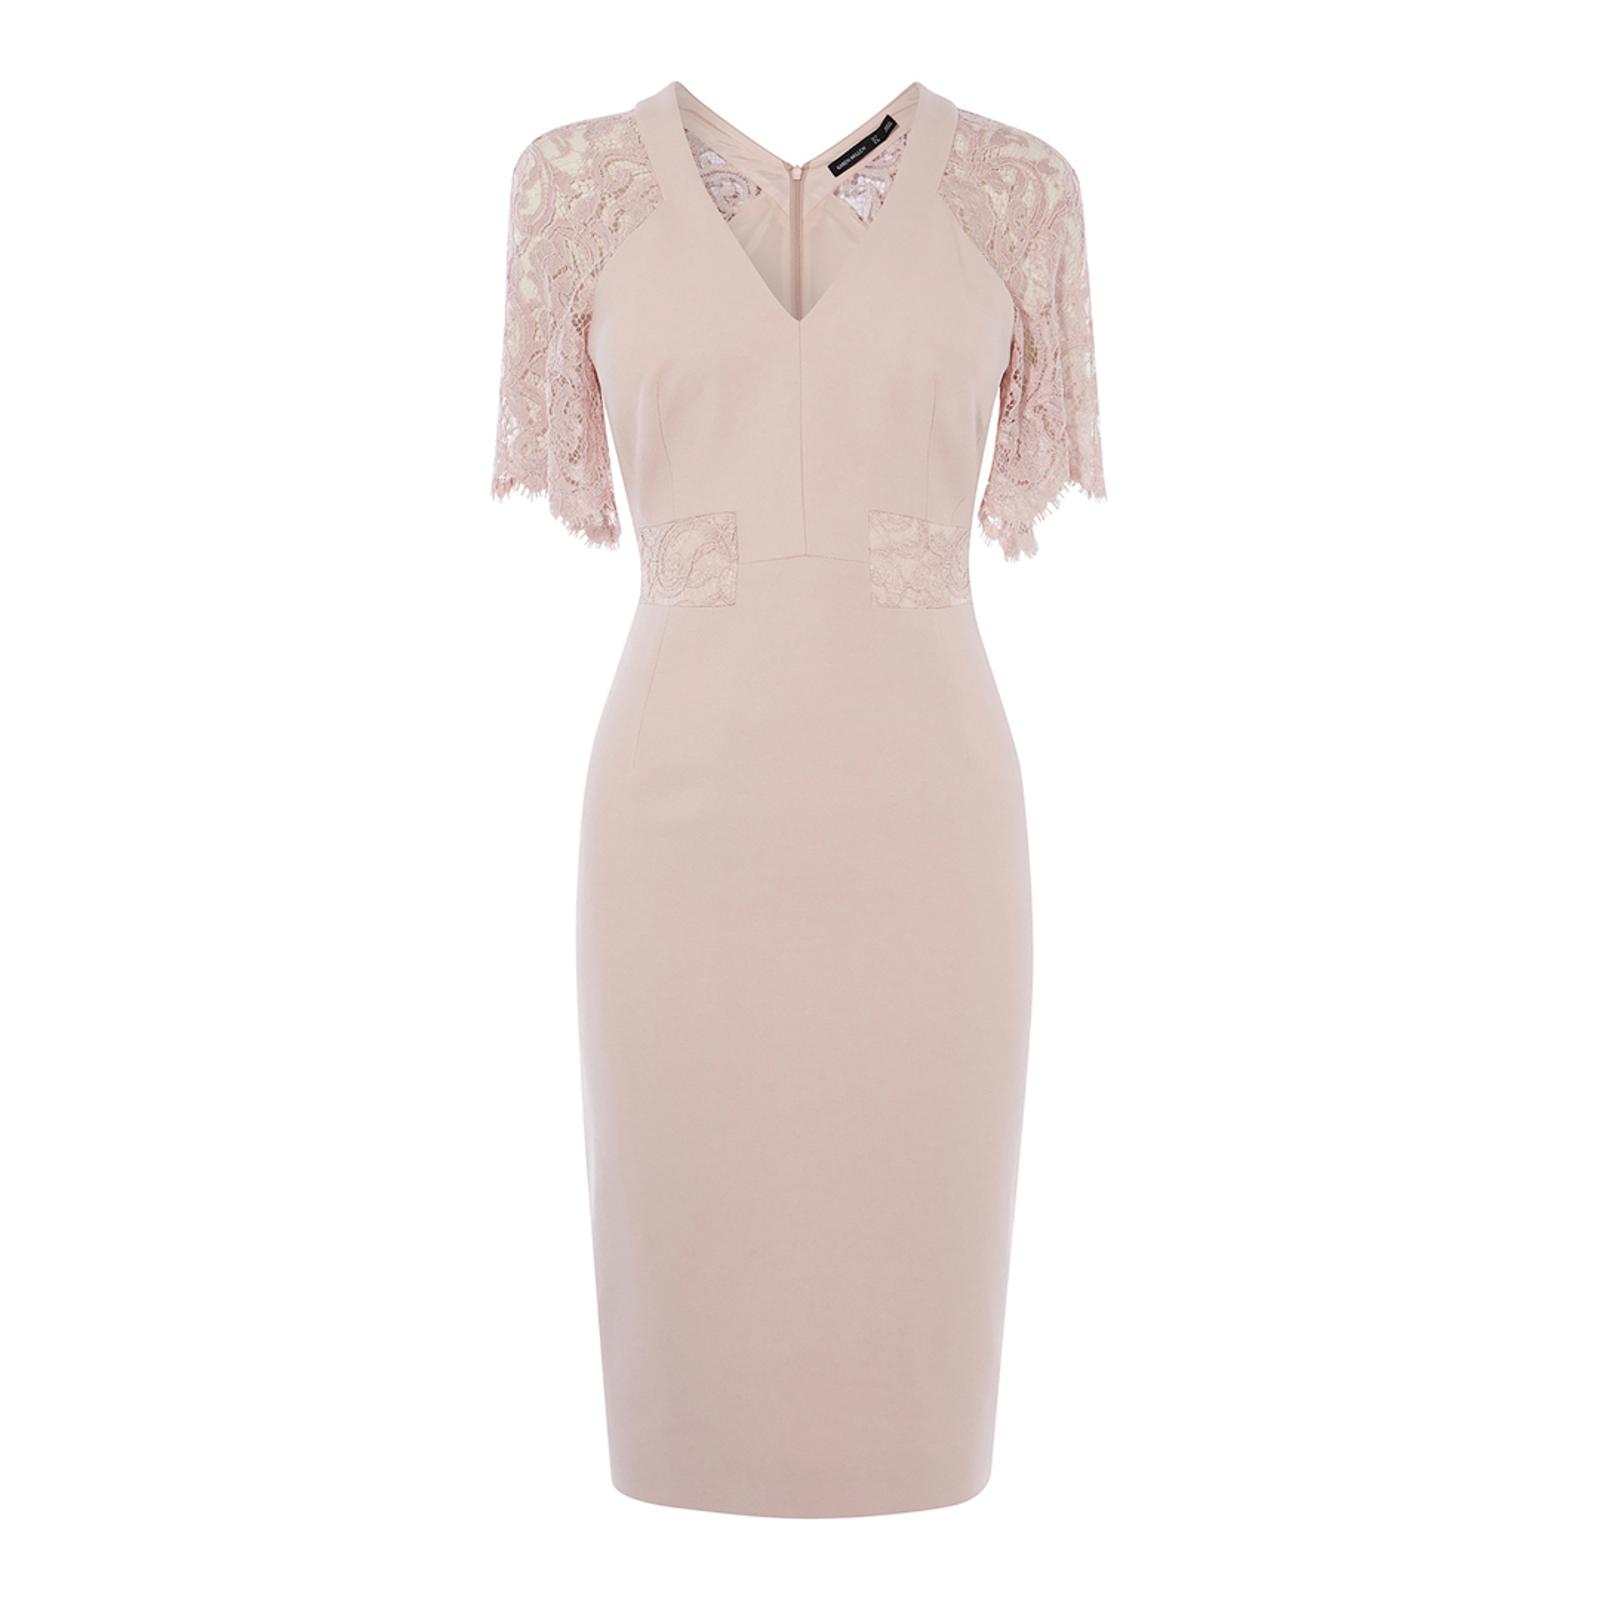 Pale Pink Lace Sleeve Dress - BrandAlley